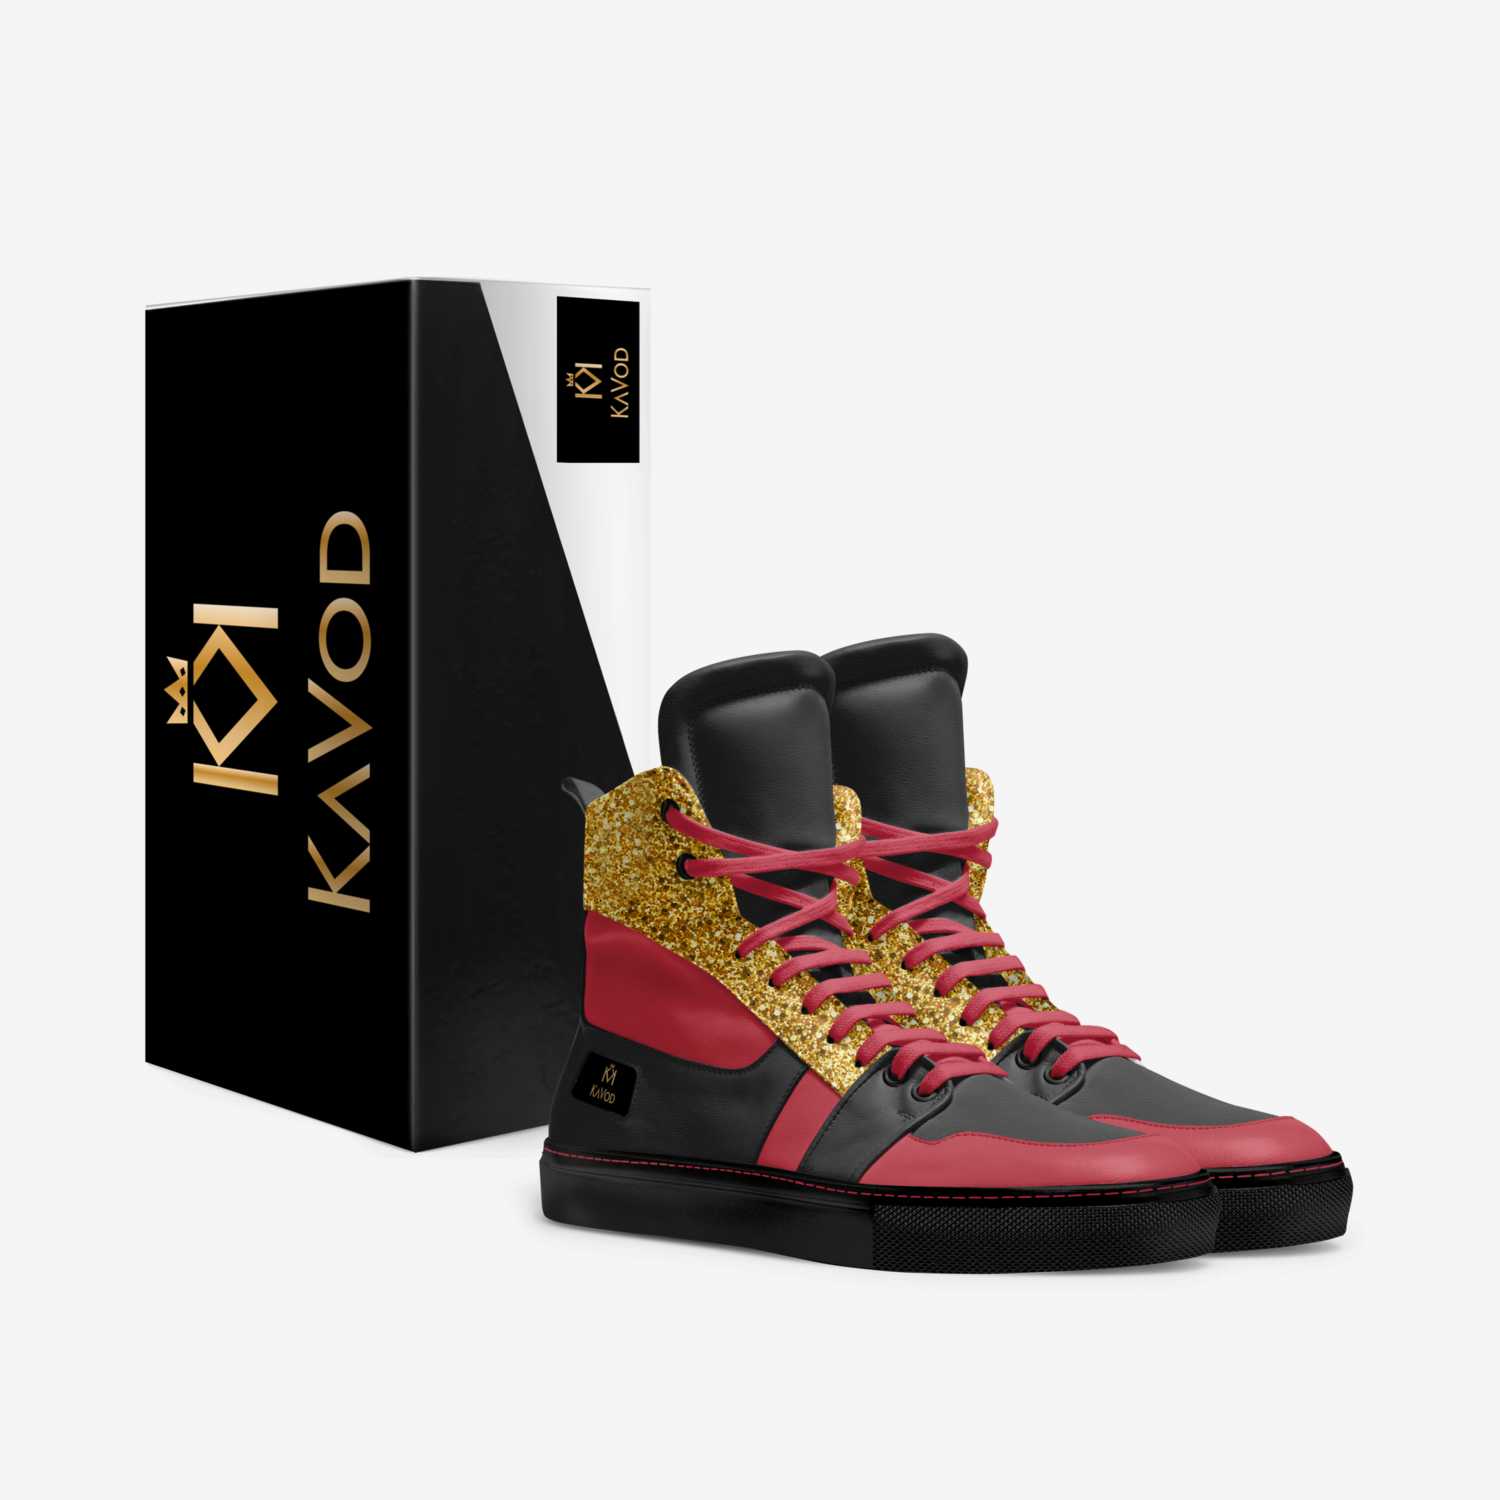 KaVod Collection custom made in Italy shoes by Naim Collins | Box view